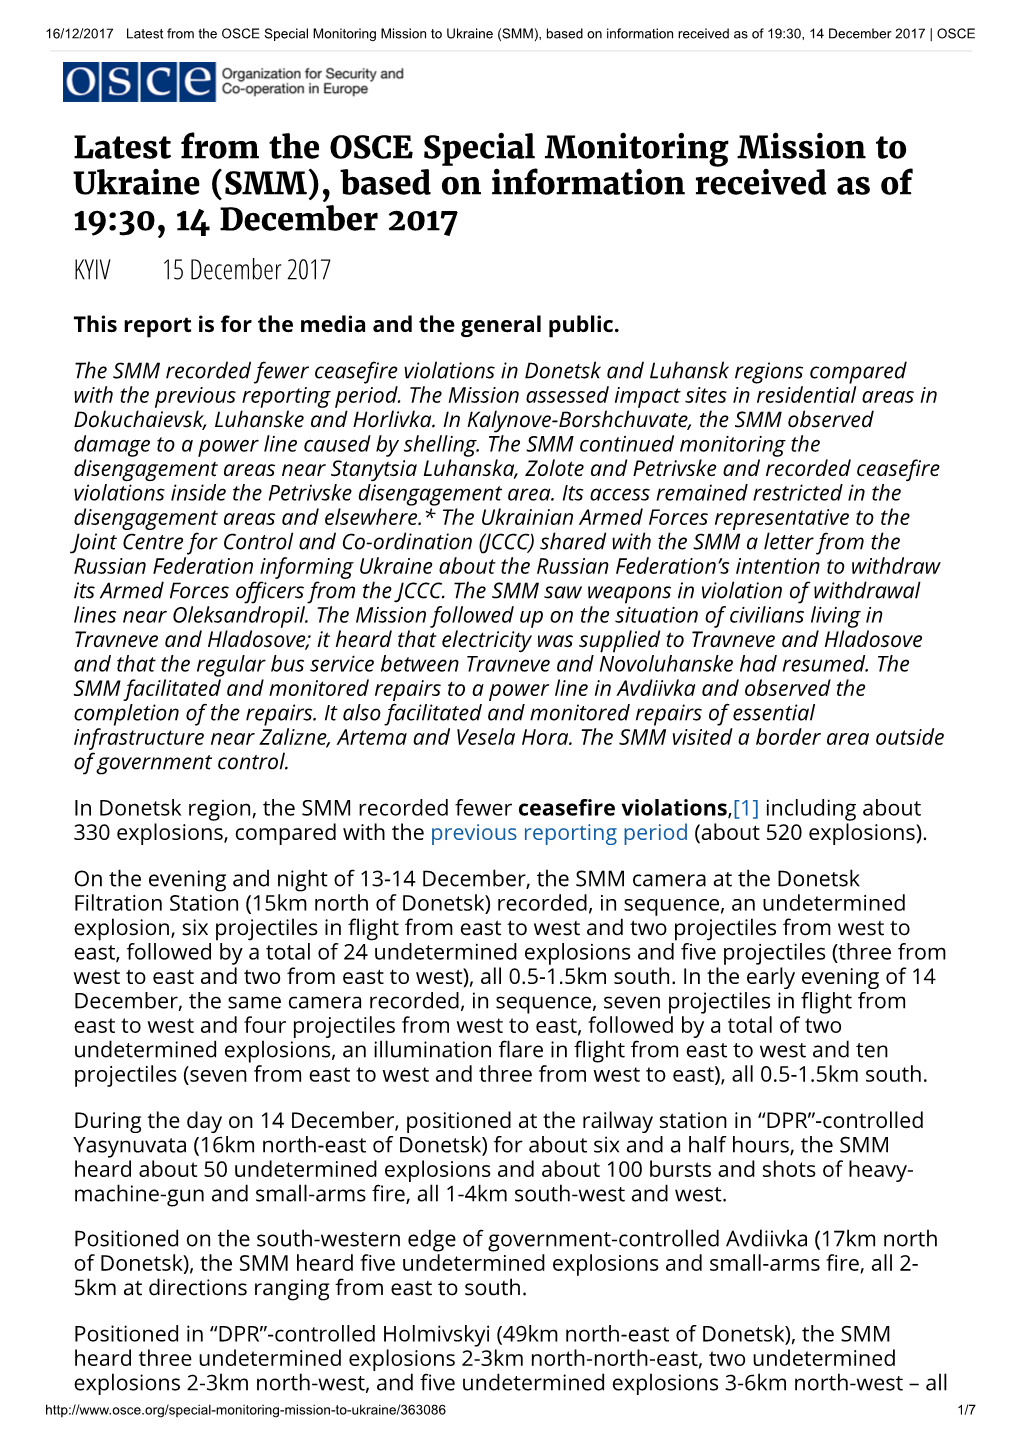 Latest from the OSCE Special Monitoring Mission to Ukraine (SMM), Based on Information Received As of 19:30, 14 December 2017 | OSCE